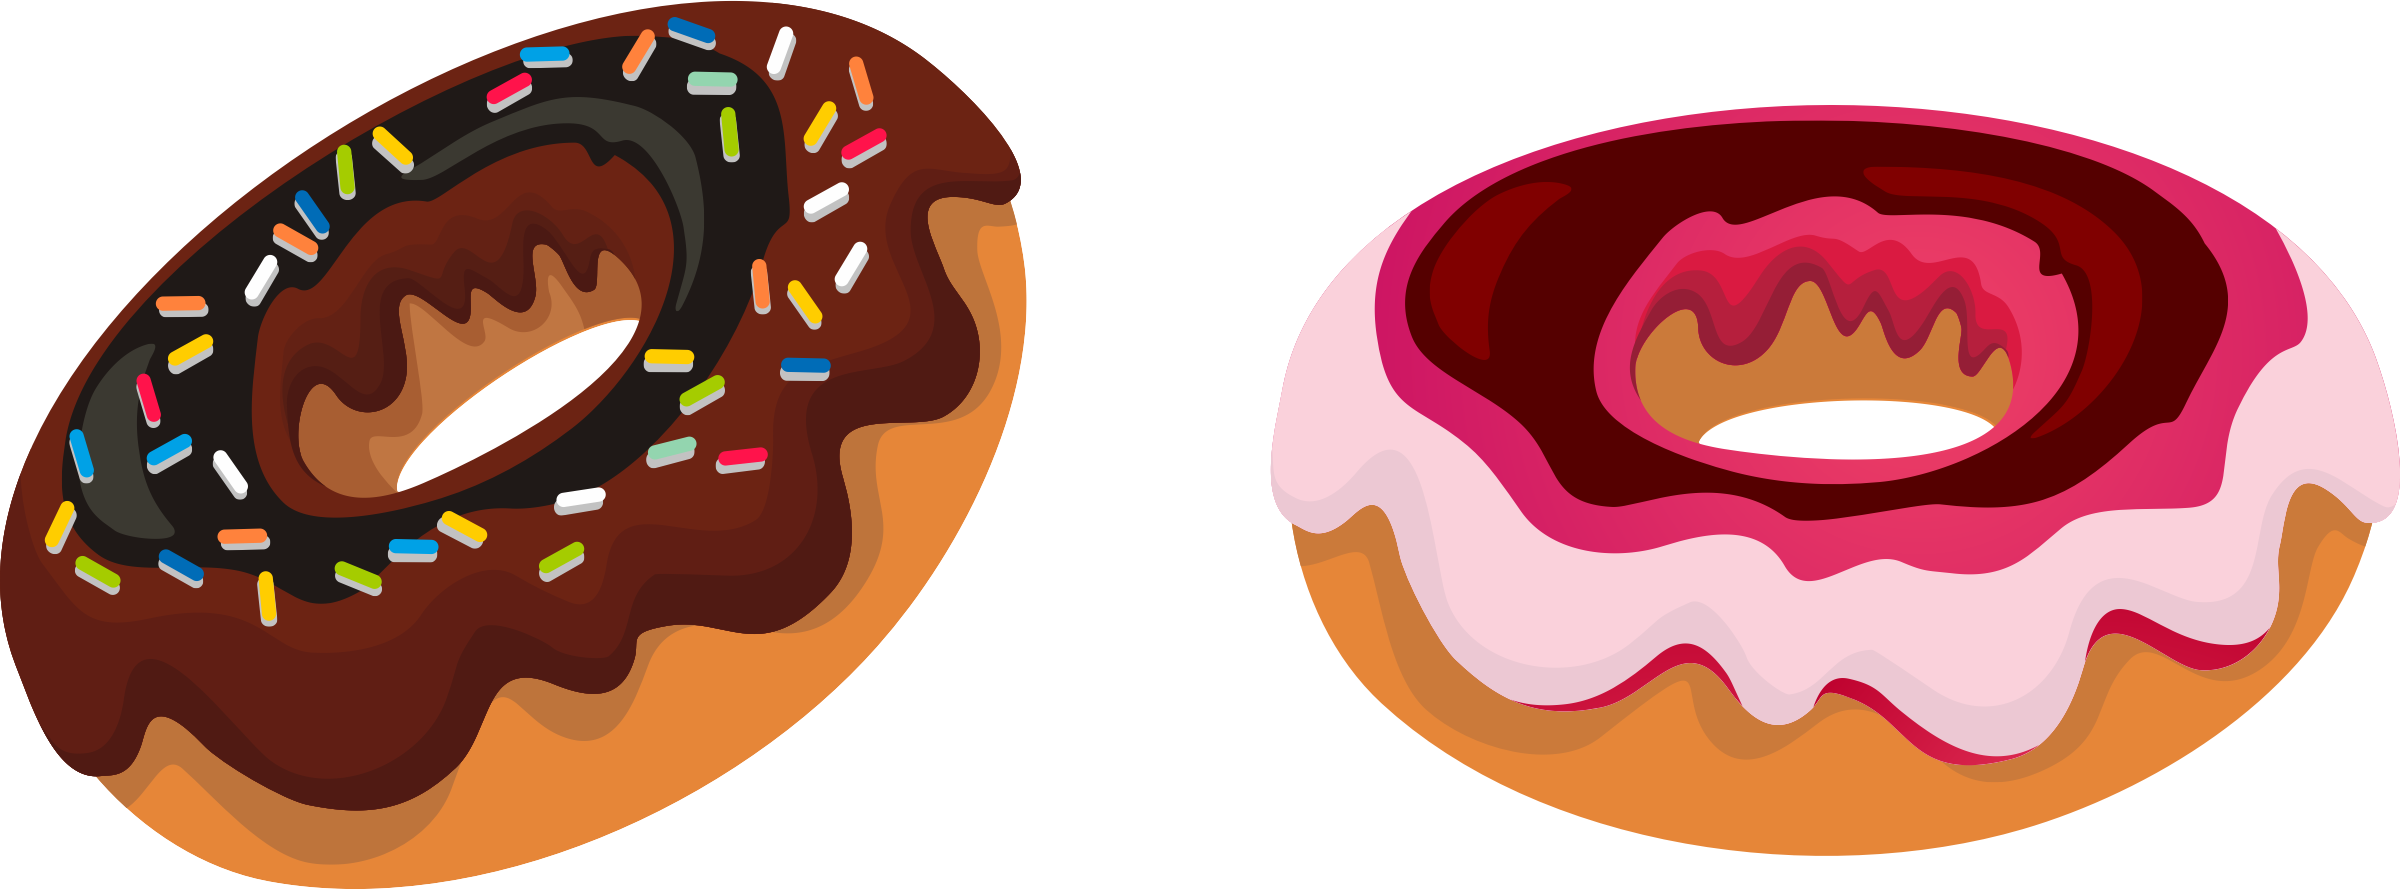 Two donut donut clipart free clip art image